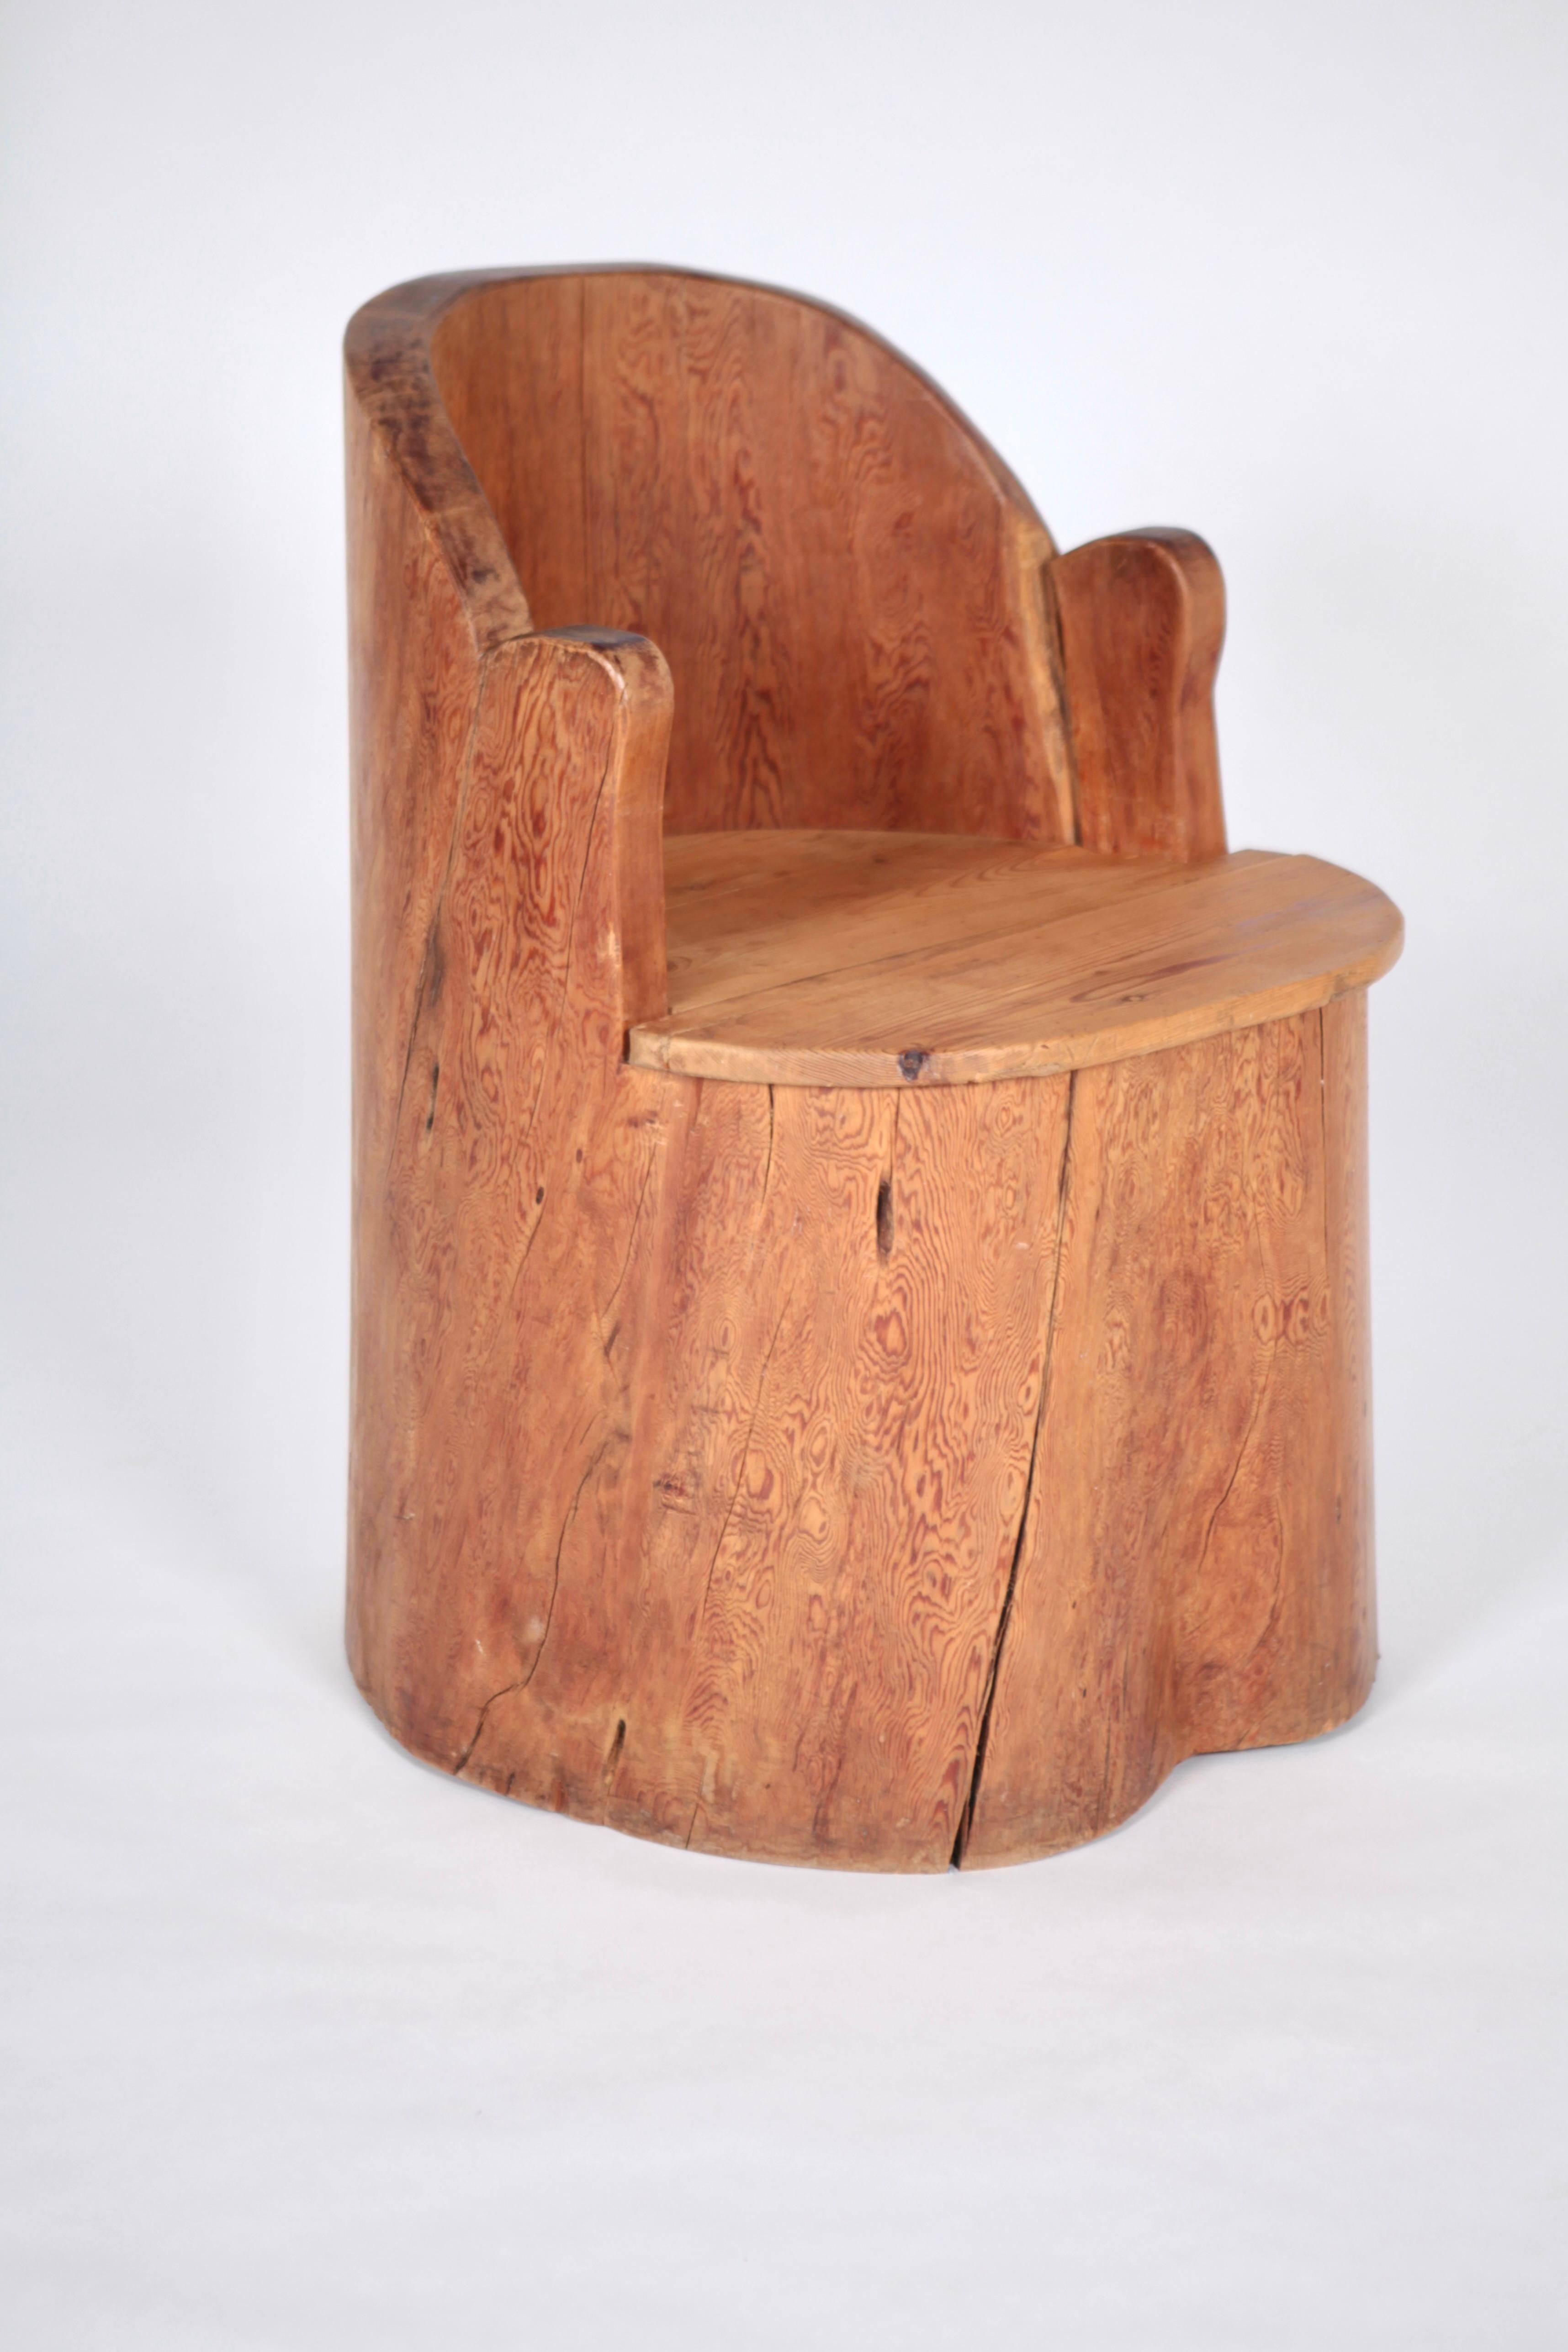 Unique stump chair in pine. Executed in Mora, Sweden, in the 1930s.
 